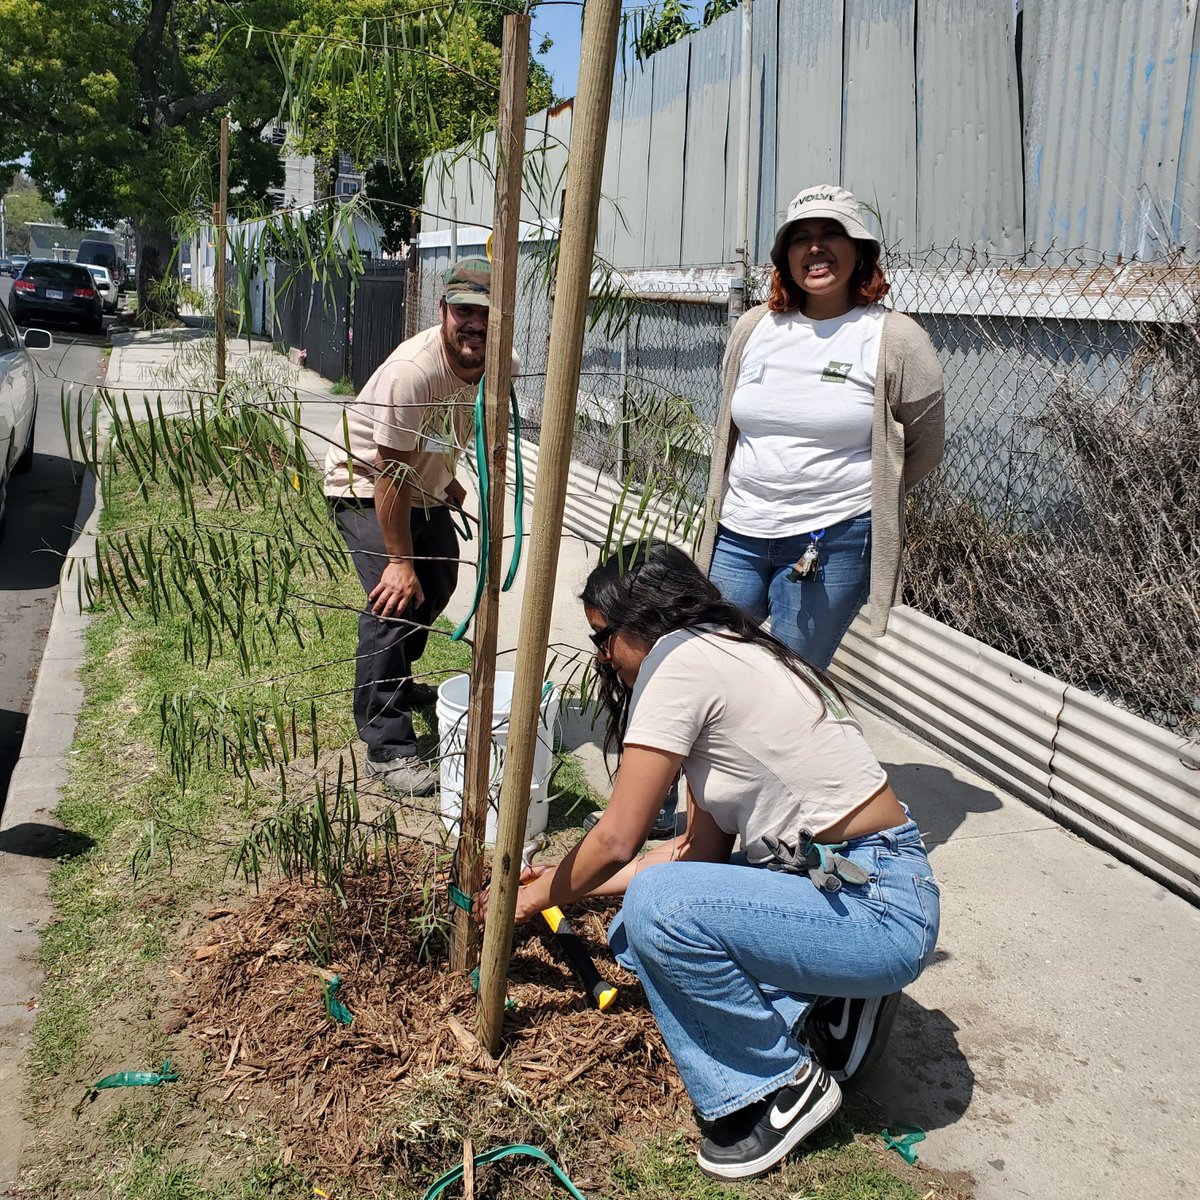 Ready to have a major impact on growing LA's urban tree canopy? Recruitment is underway for an Urban Forestry Manager to join our team. More information on our website: northeasttrees.org/work-with-us.